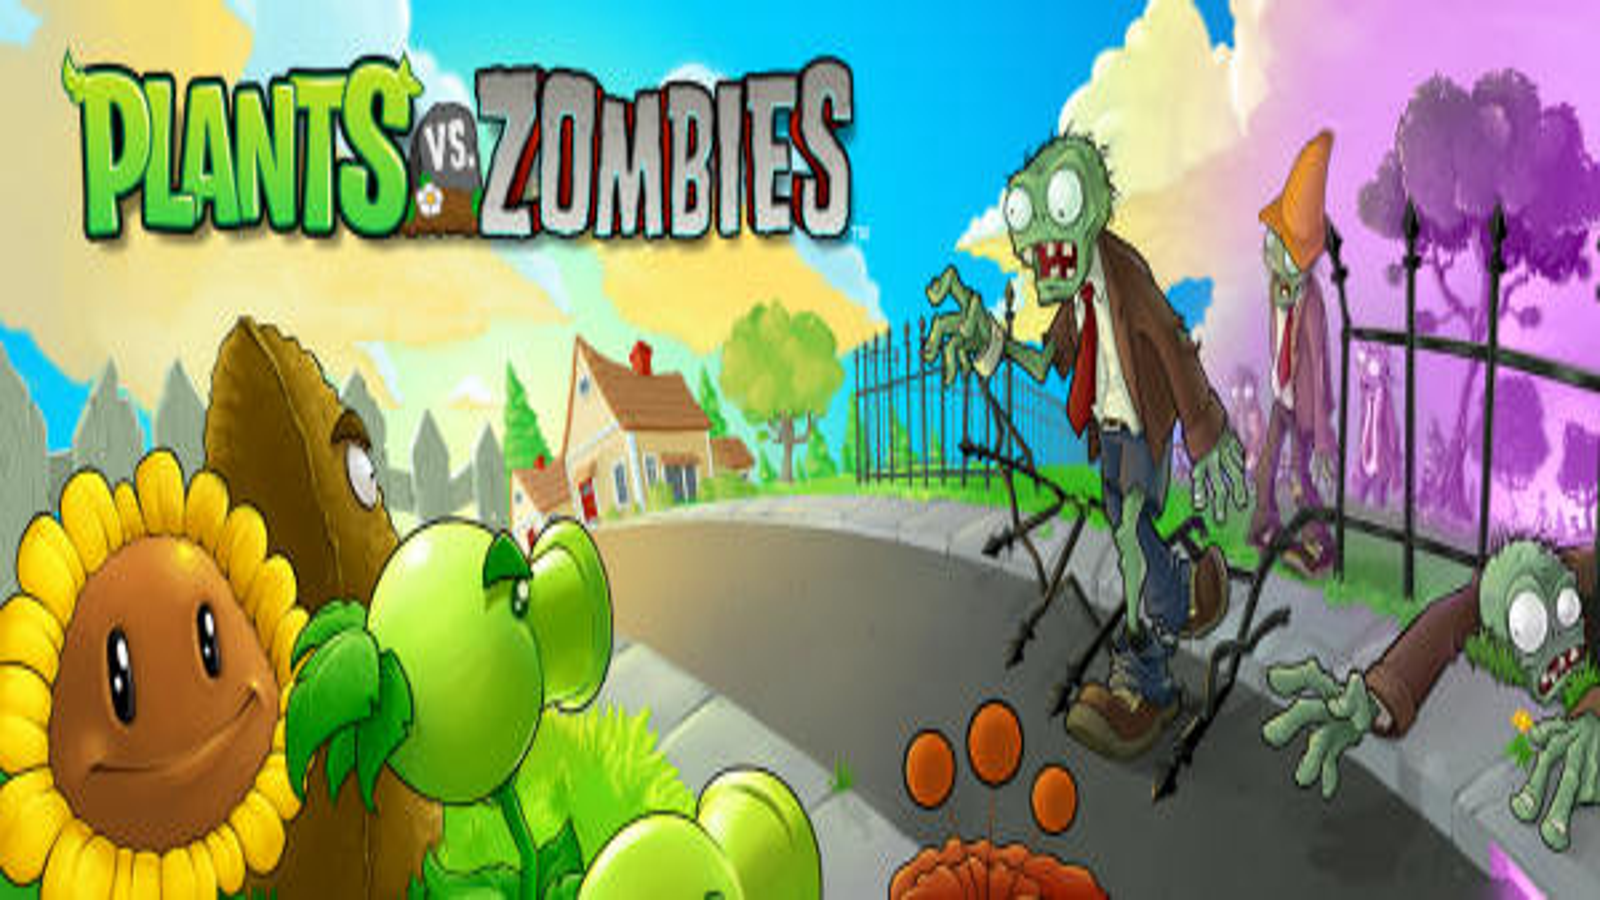 Plants vs Zombies Online Game - Play Plants vs Zombies Online